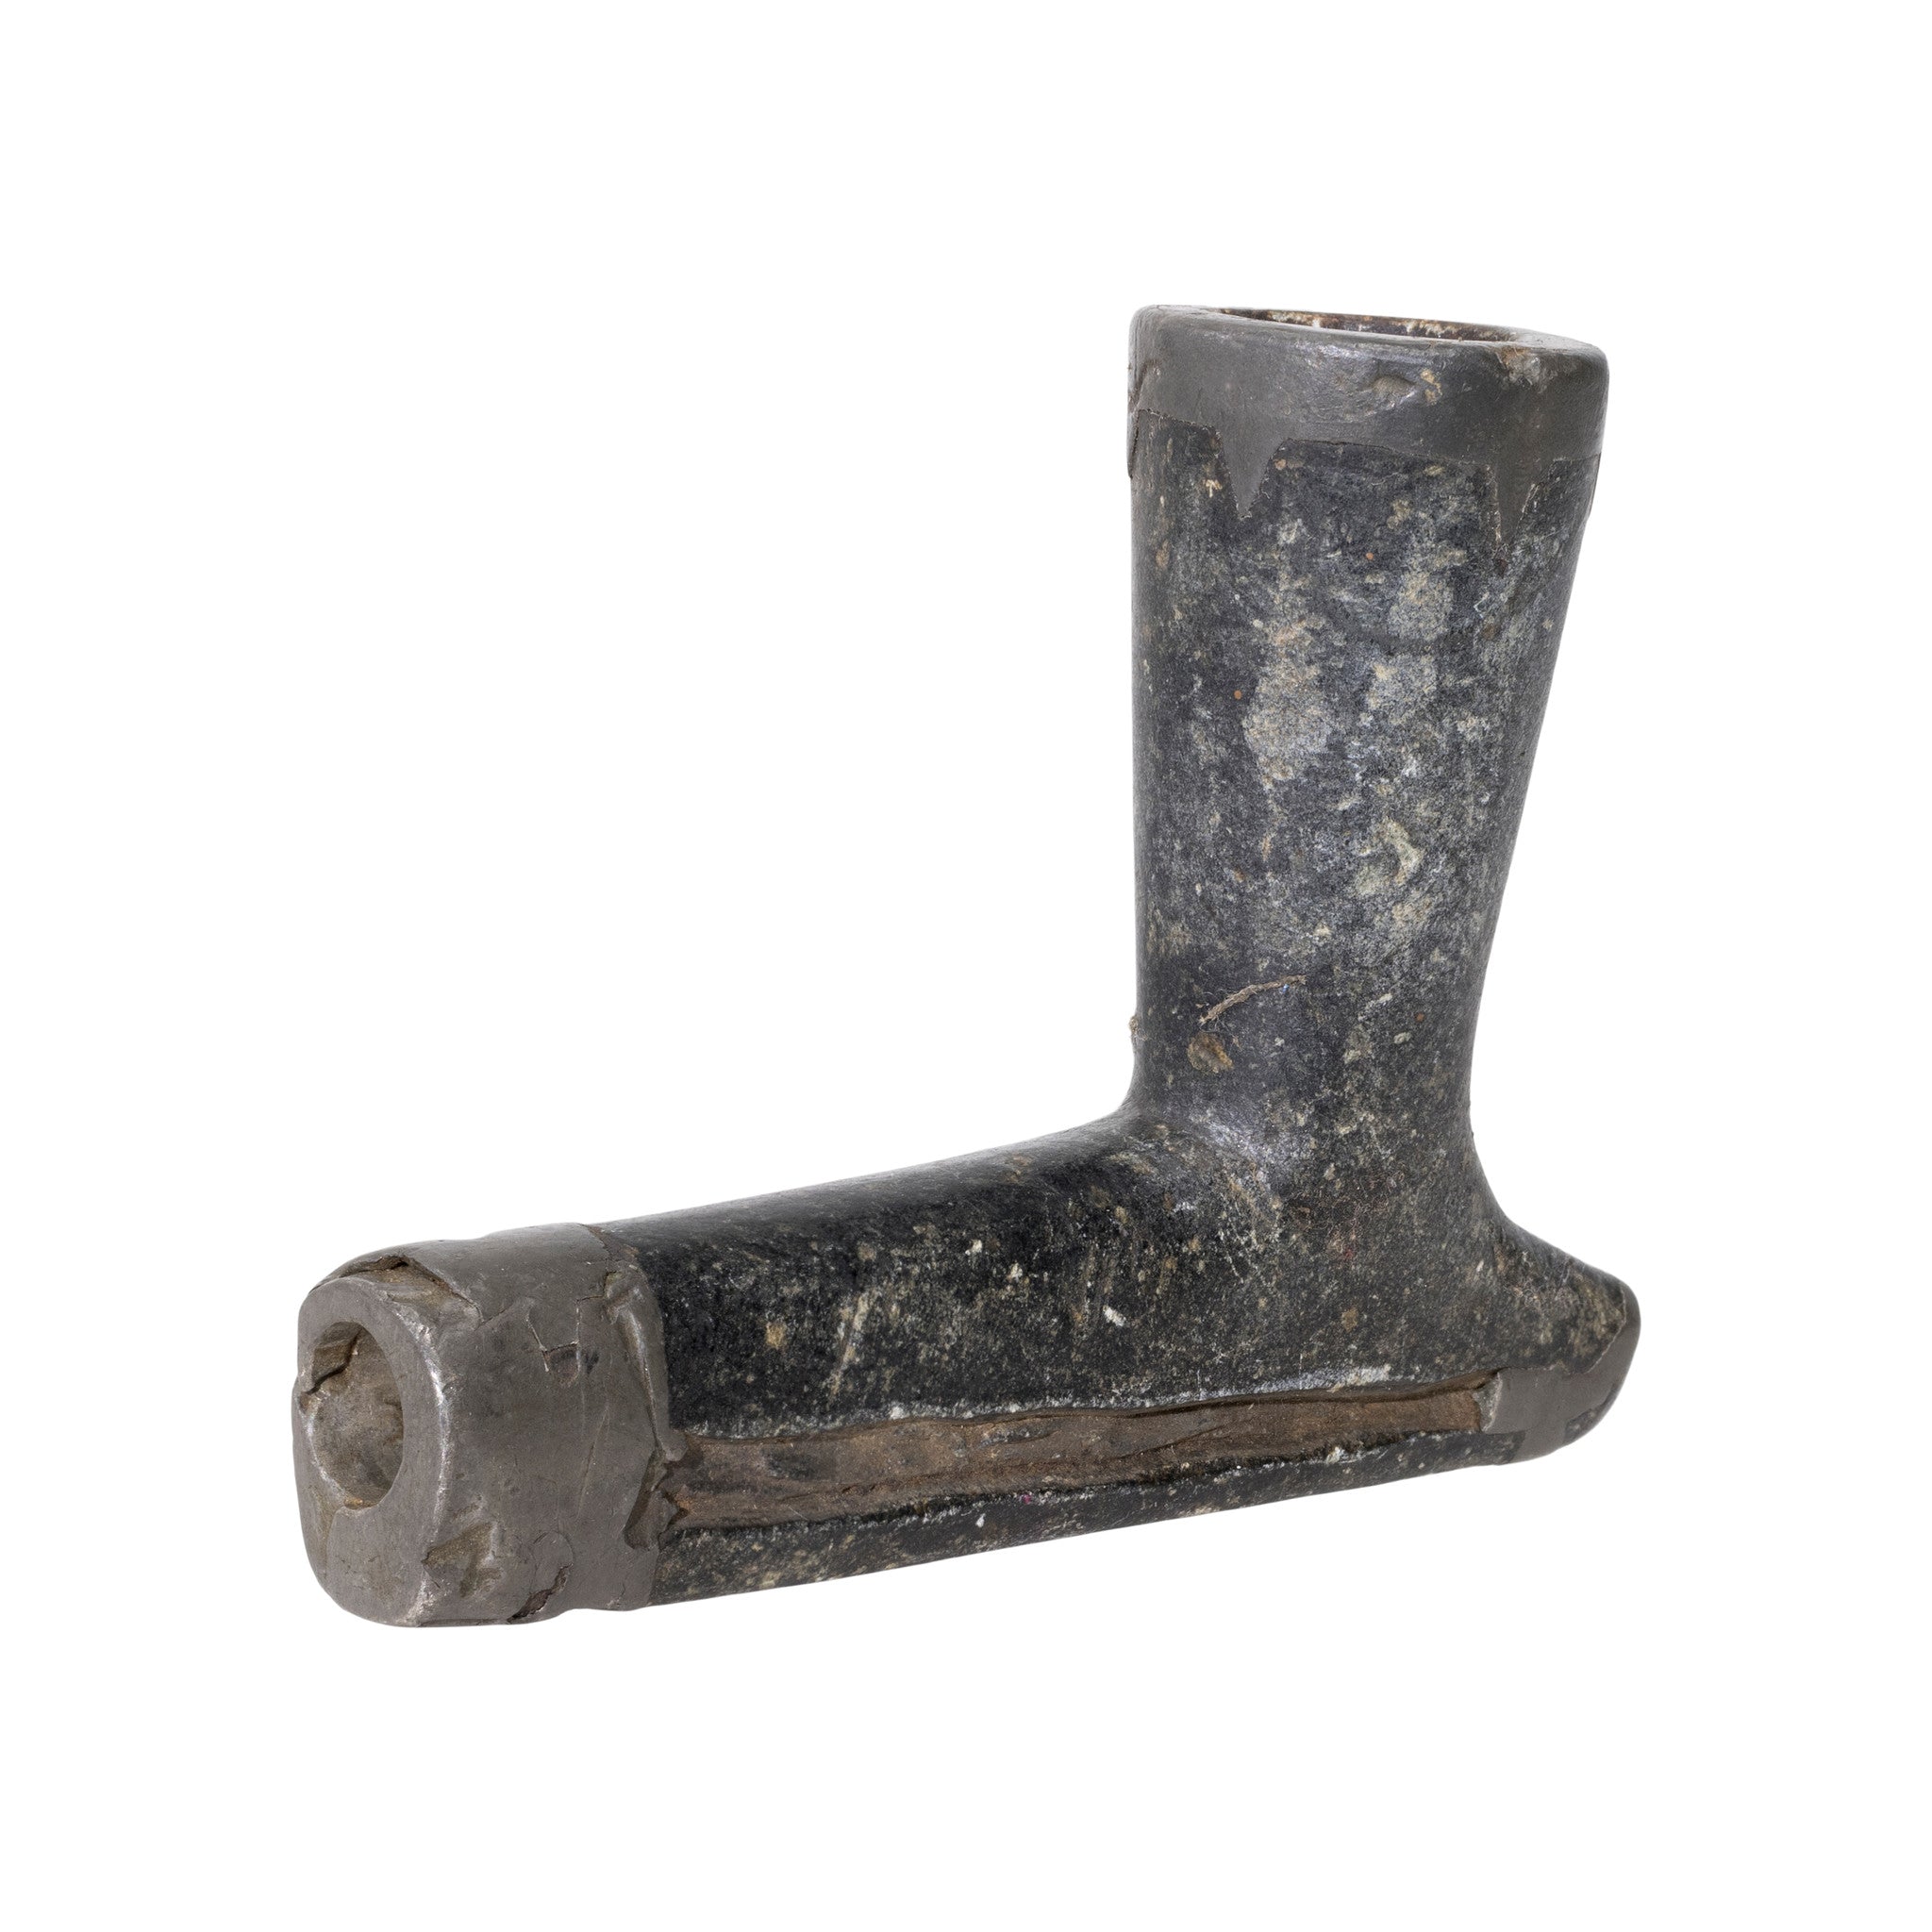 Chippewa Elbow Pipe